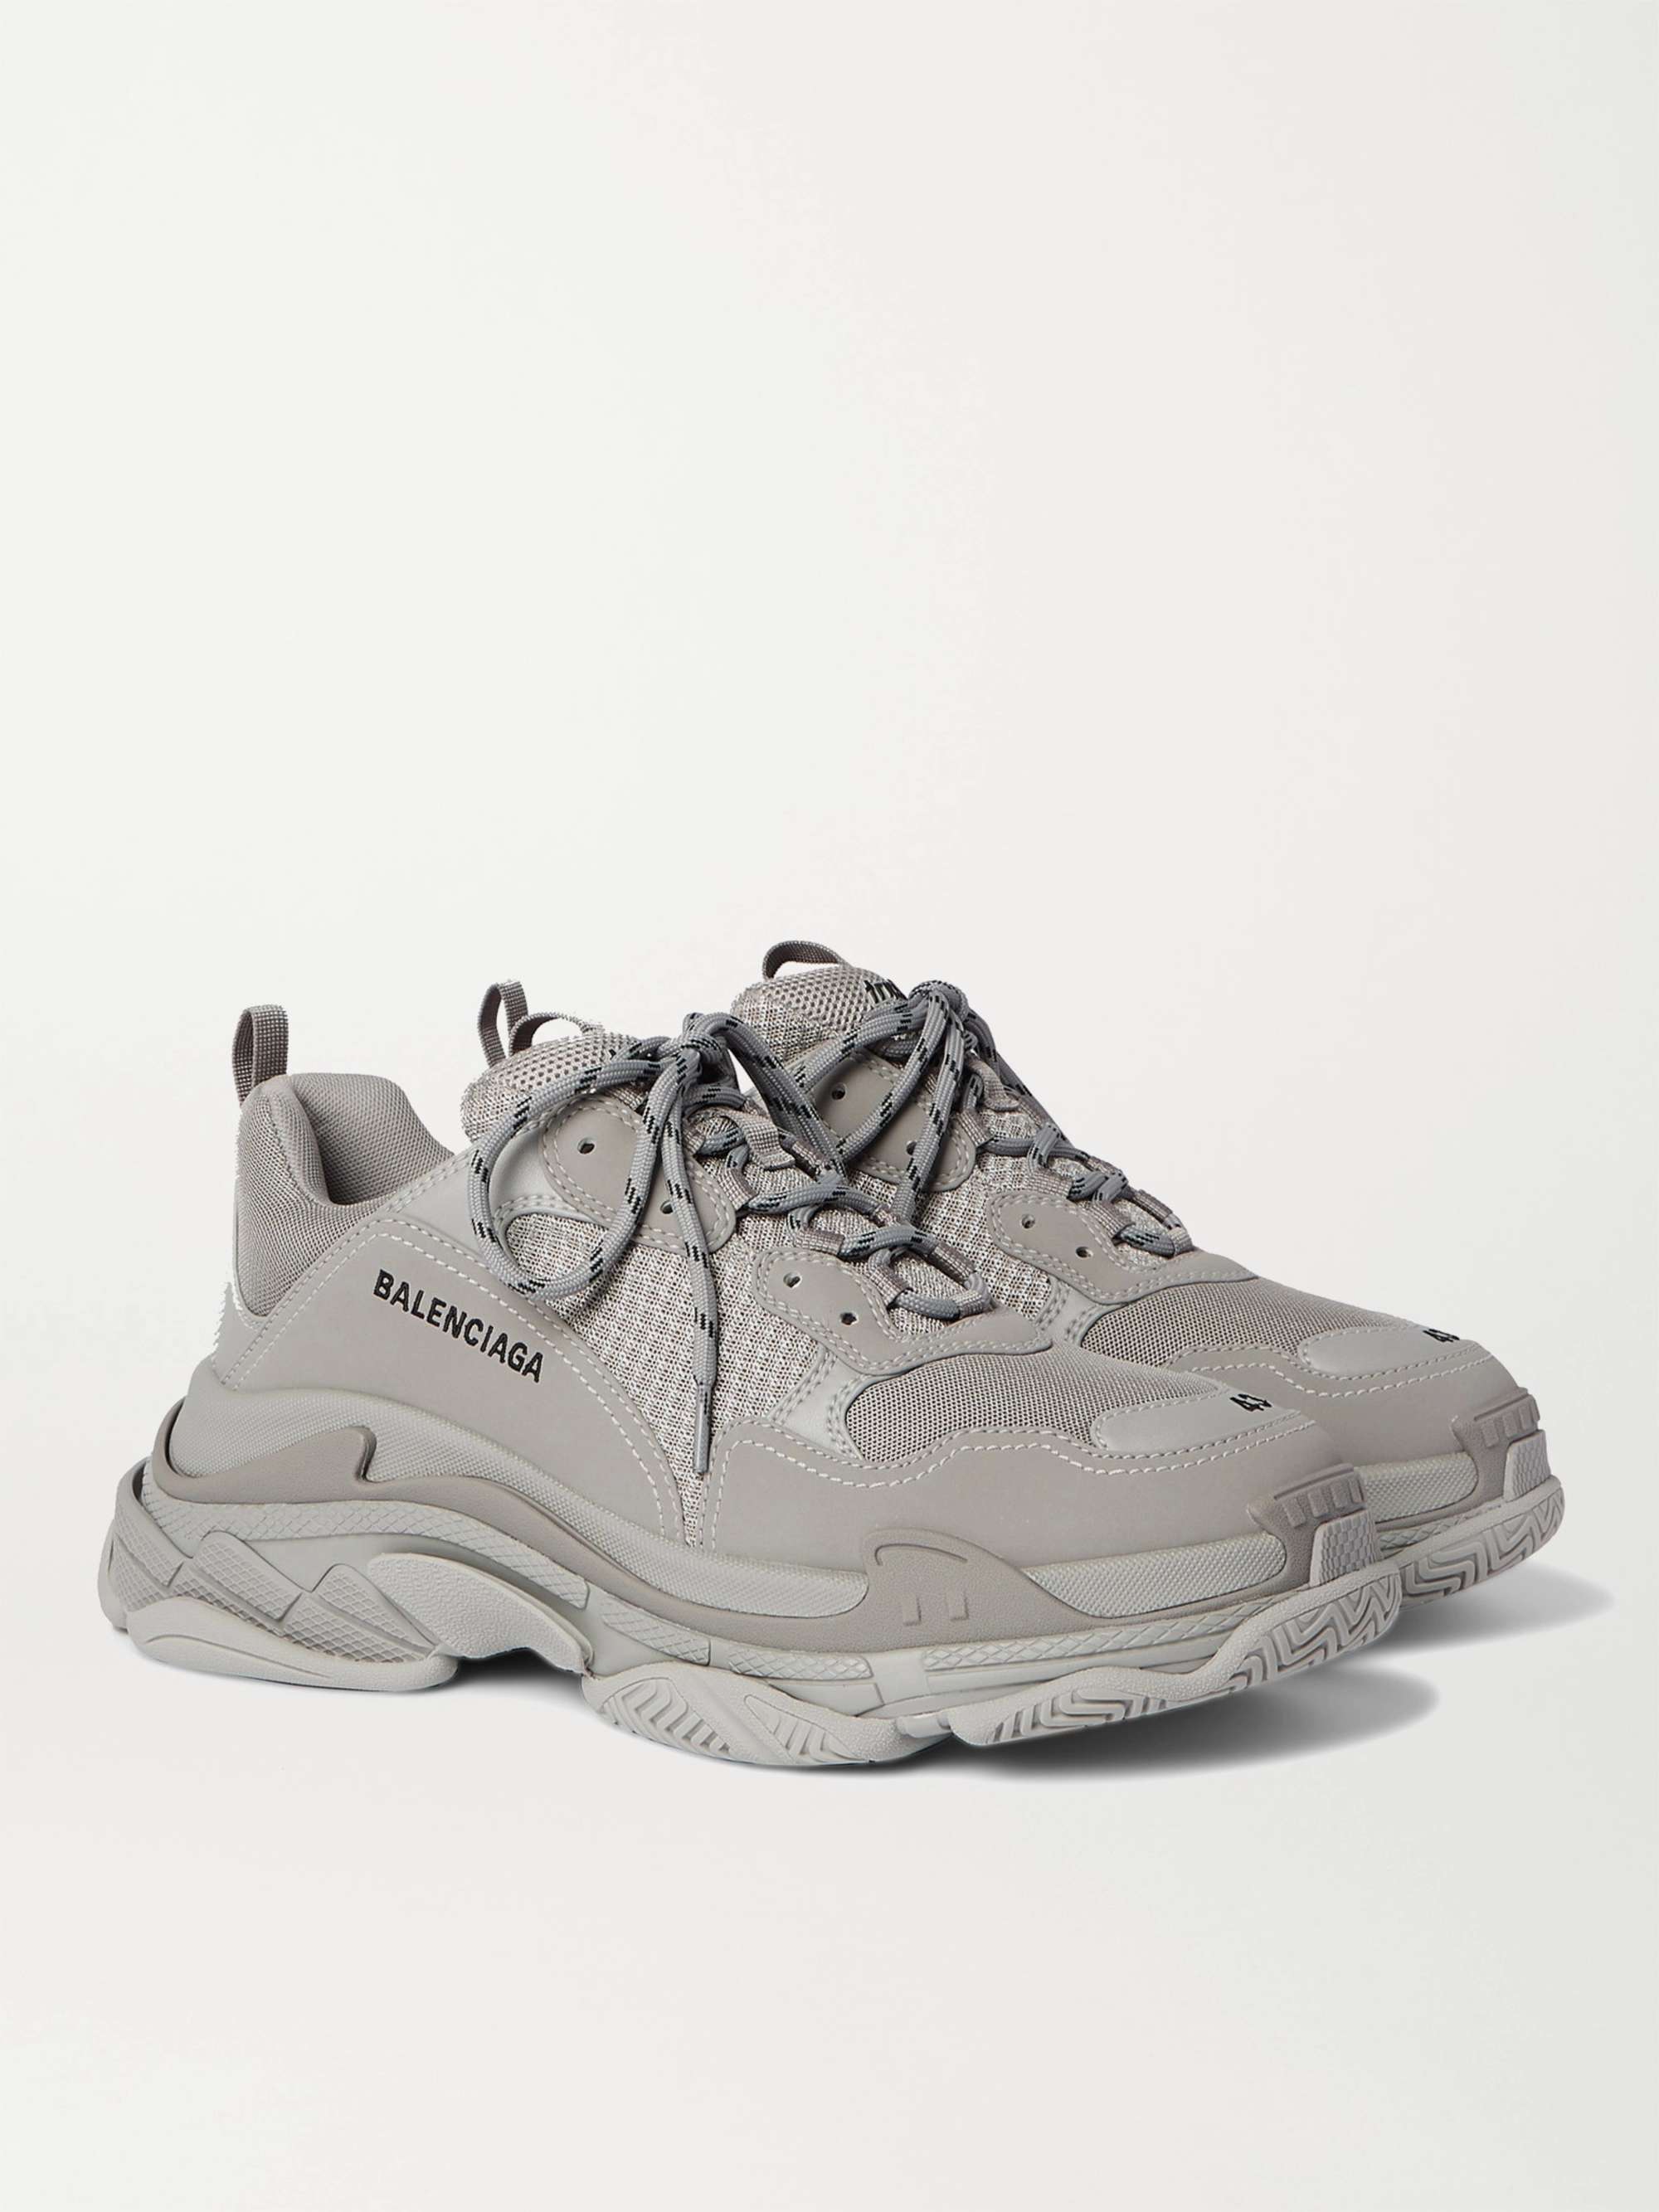 Gray Triple S Mesh and Faux Leather Sneakers | BALENCIAGA | MR PORTER